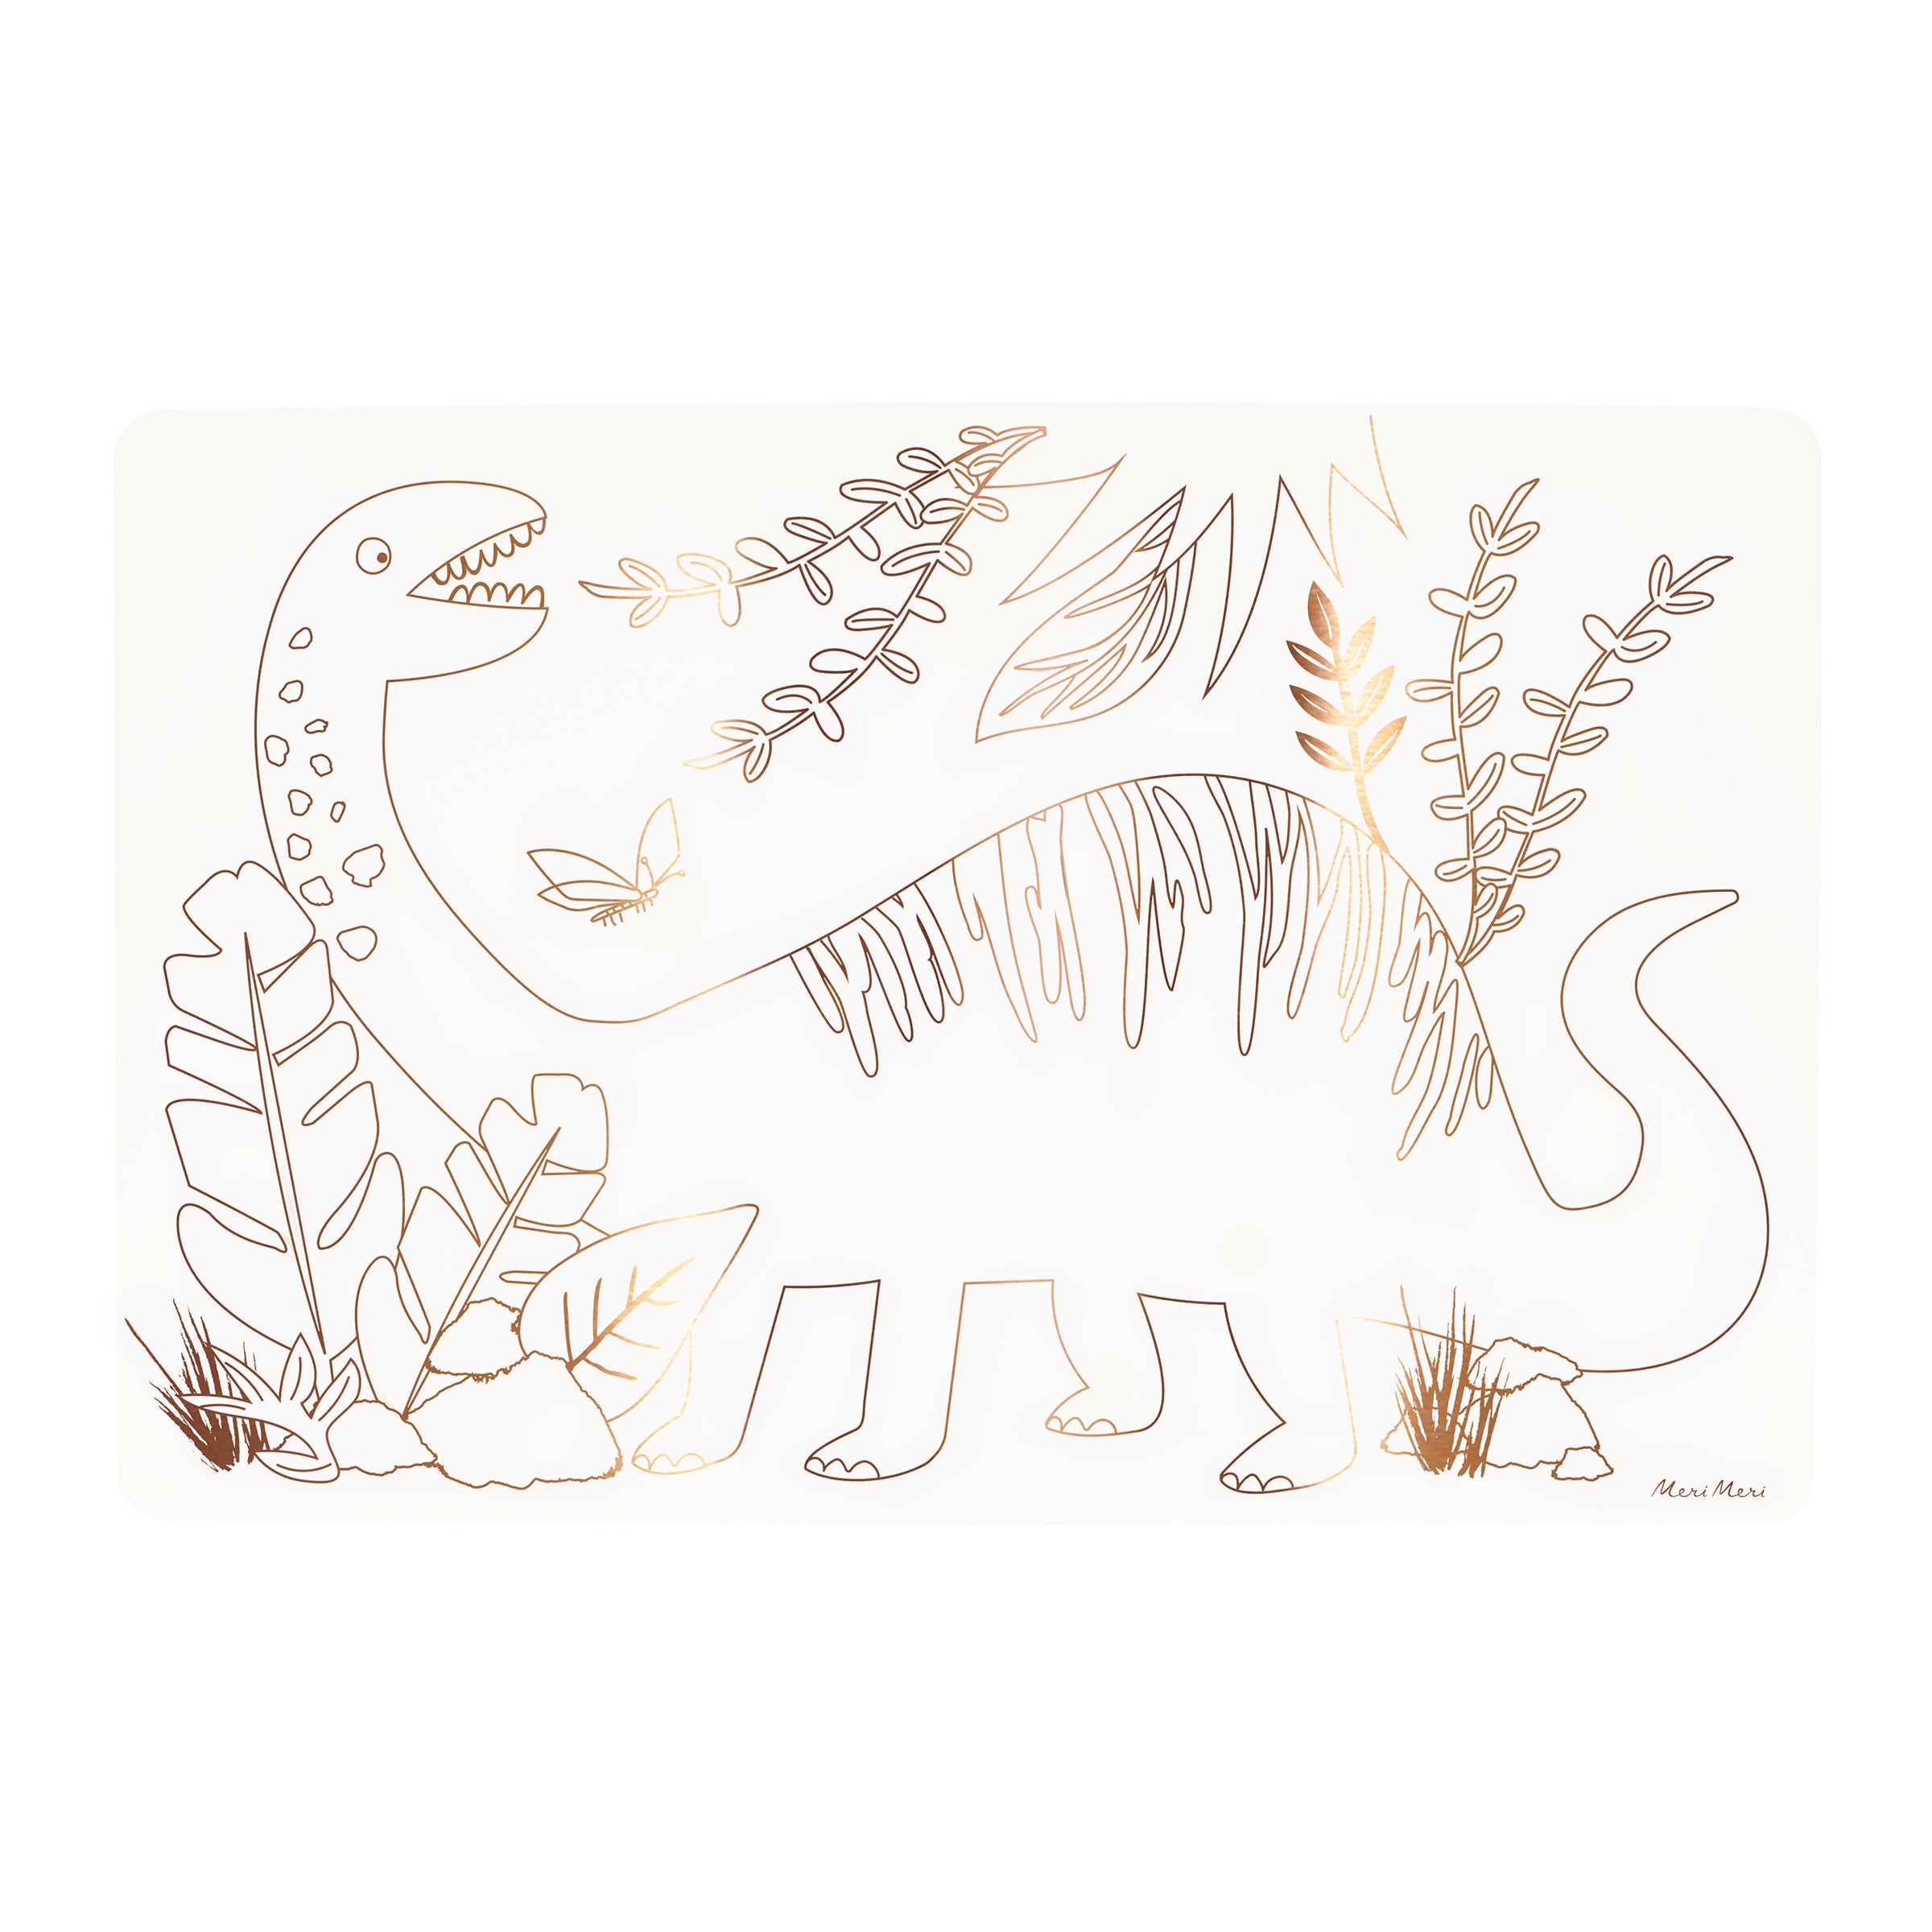 Colouring time is here, with out special kids placemats featuring dinosaurs, perfect for a dinosaur party.